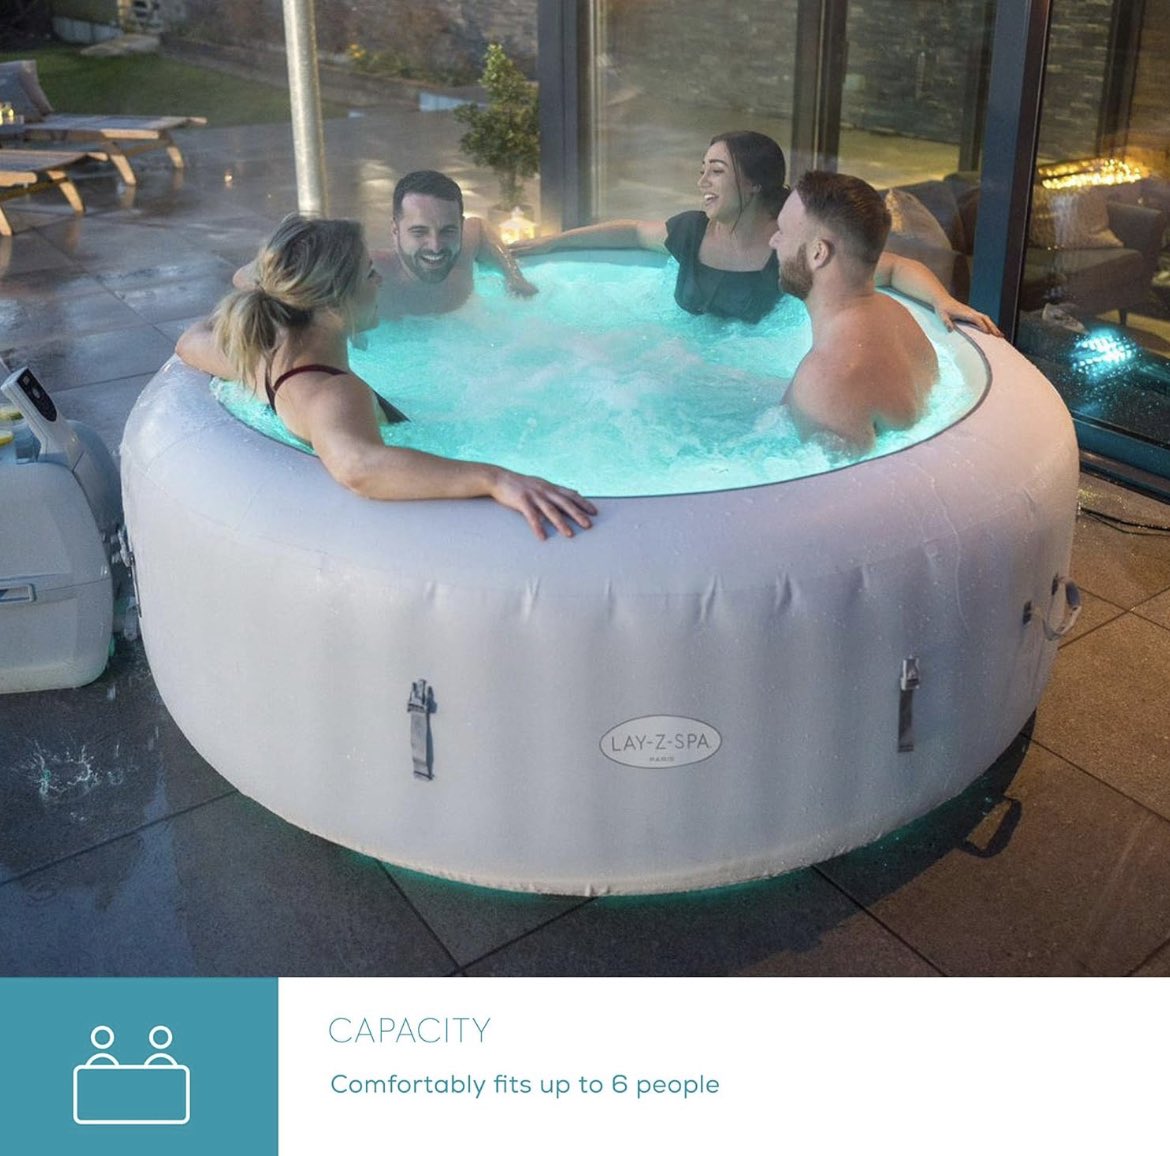 Get 48% OFF this Lay Z Spa hot tub 

Check it out here ➡️ amzn.to/3UxIgic

# ad